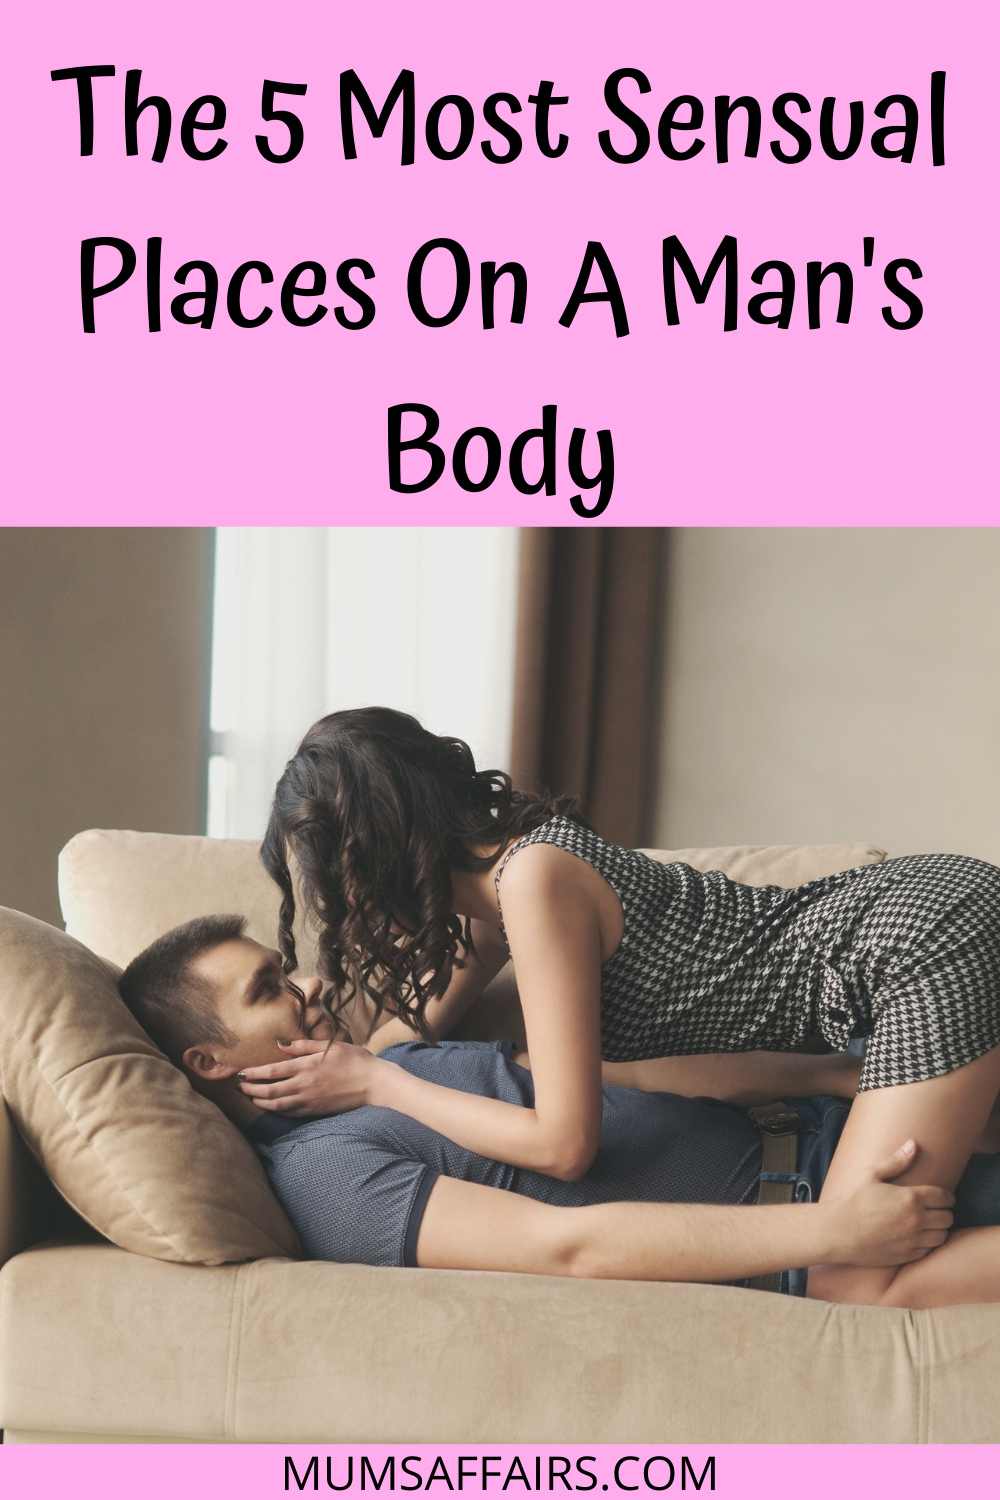 5 Most Sensual Places on a Man's Body